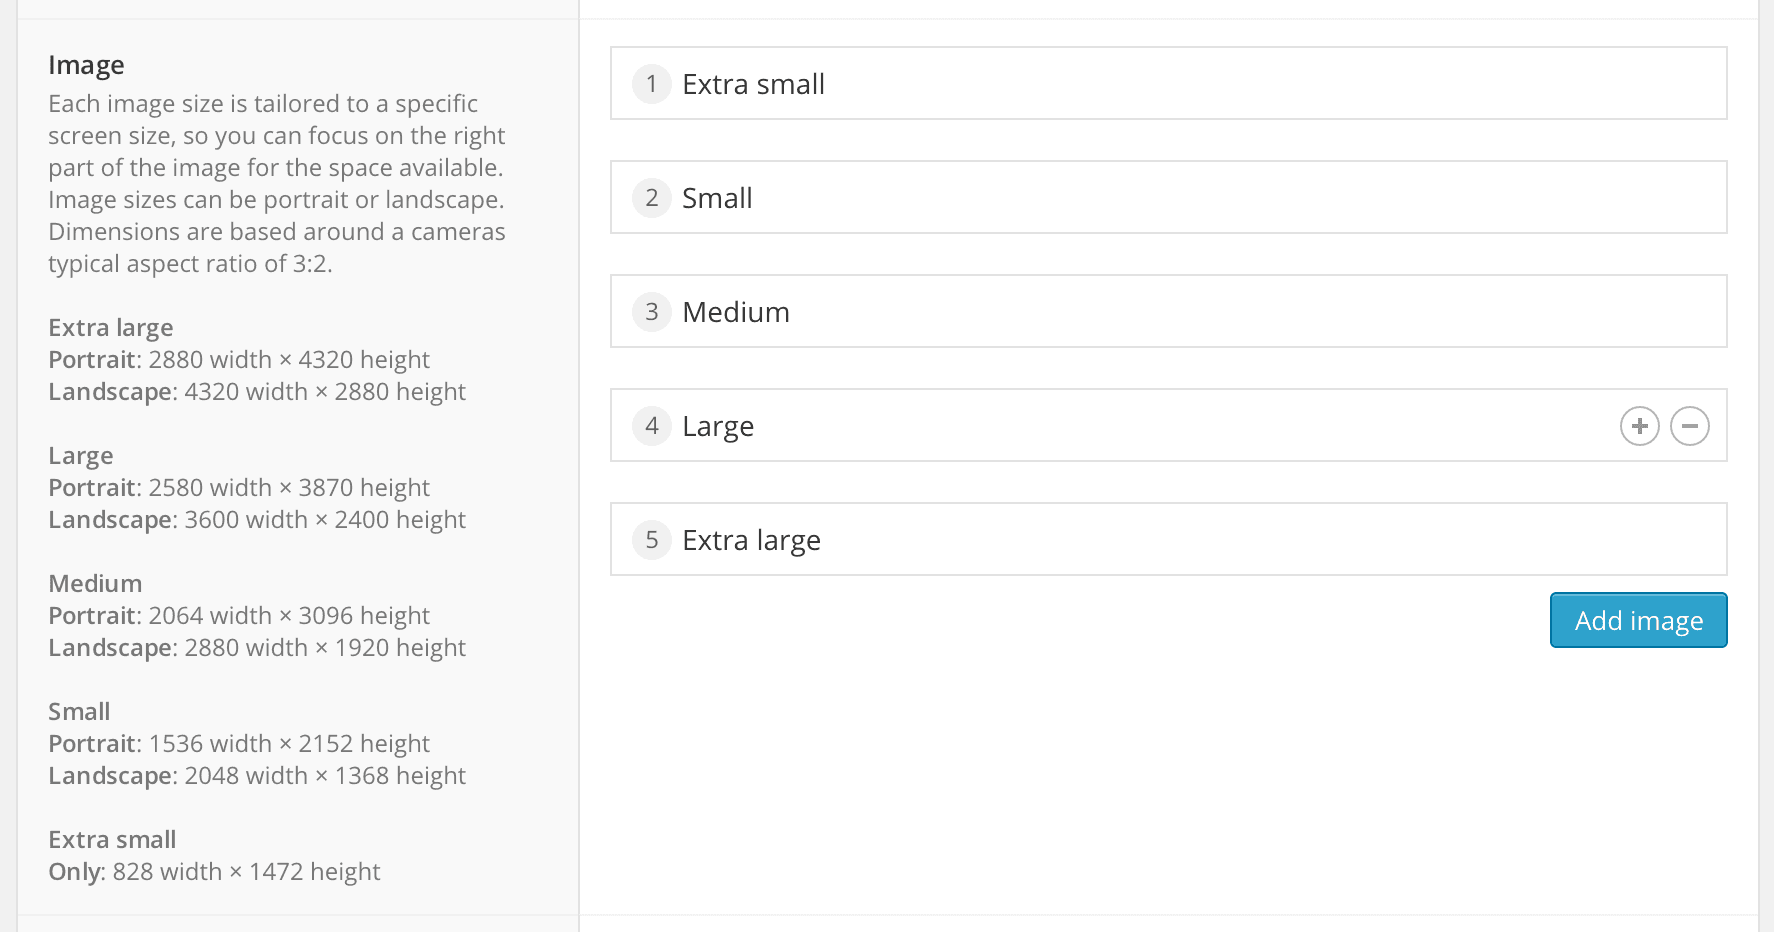 The custom fields I have used to allow me to choose the exact image I need for my picture sources